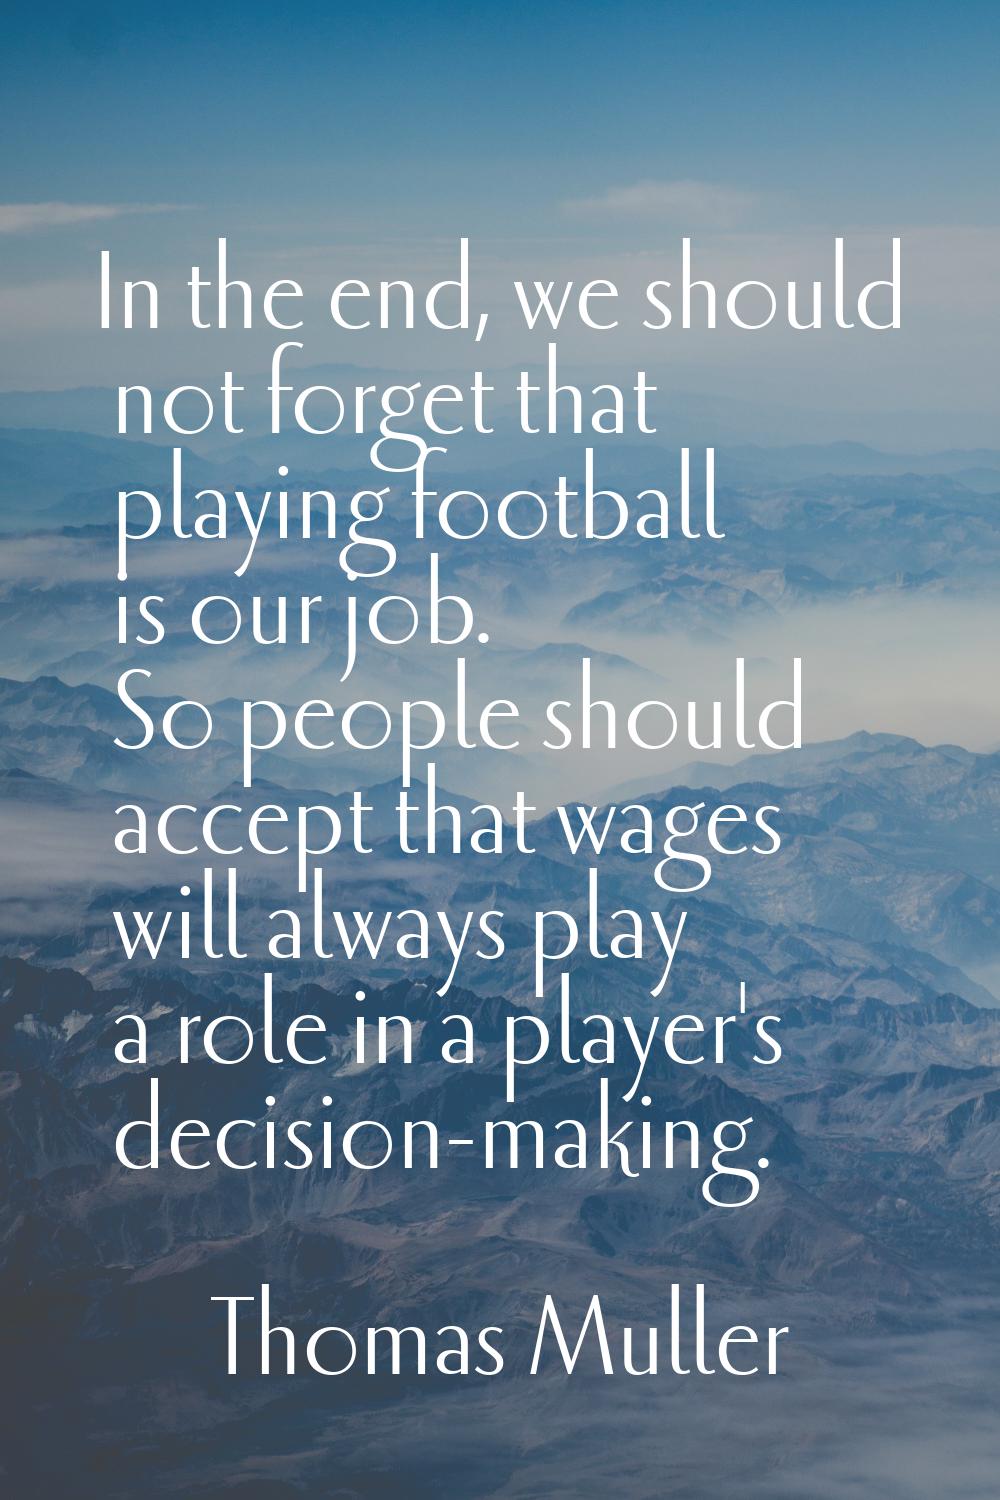 In the end, we should not forget that playing football is our job. So people should accept that wag